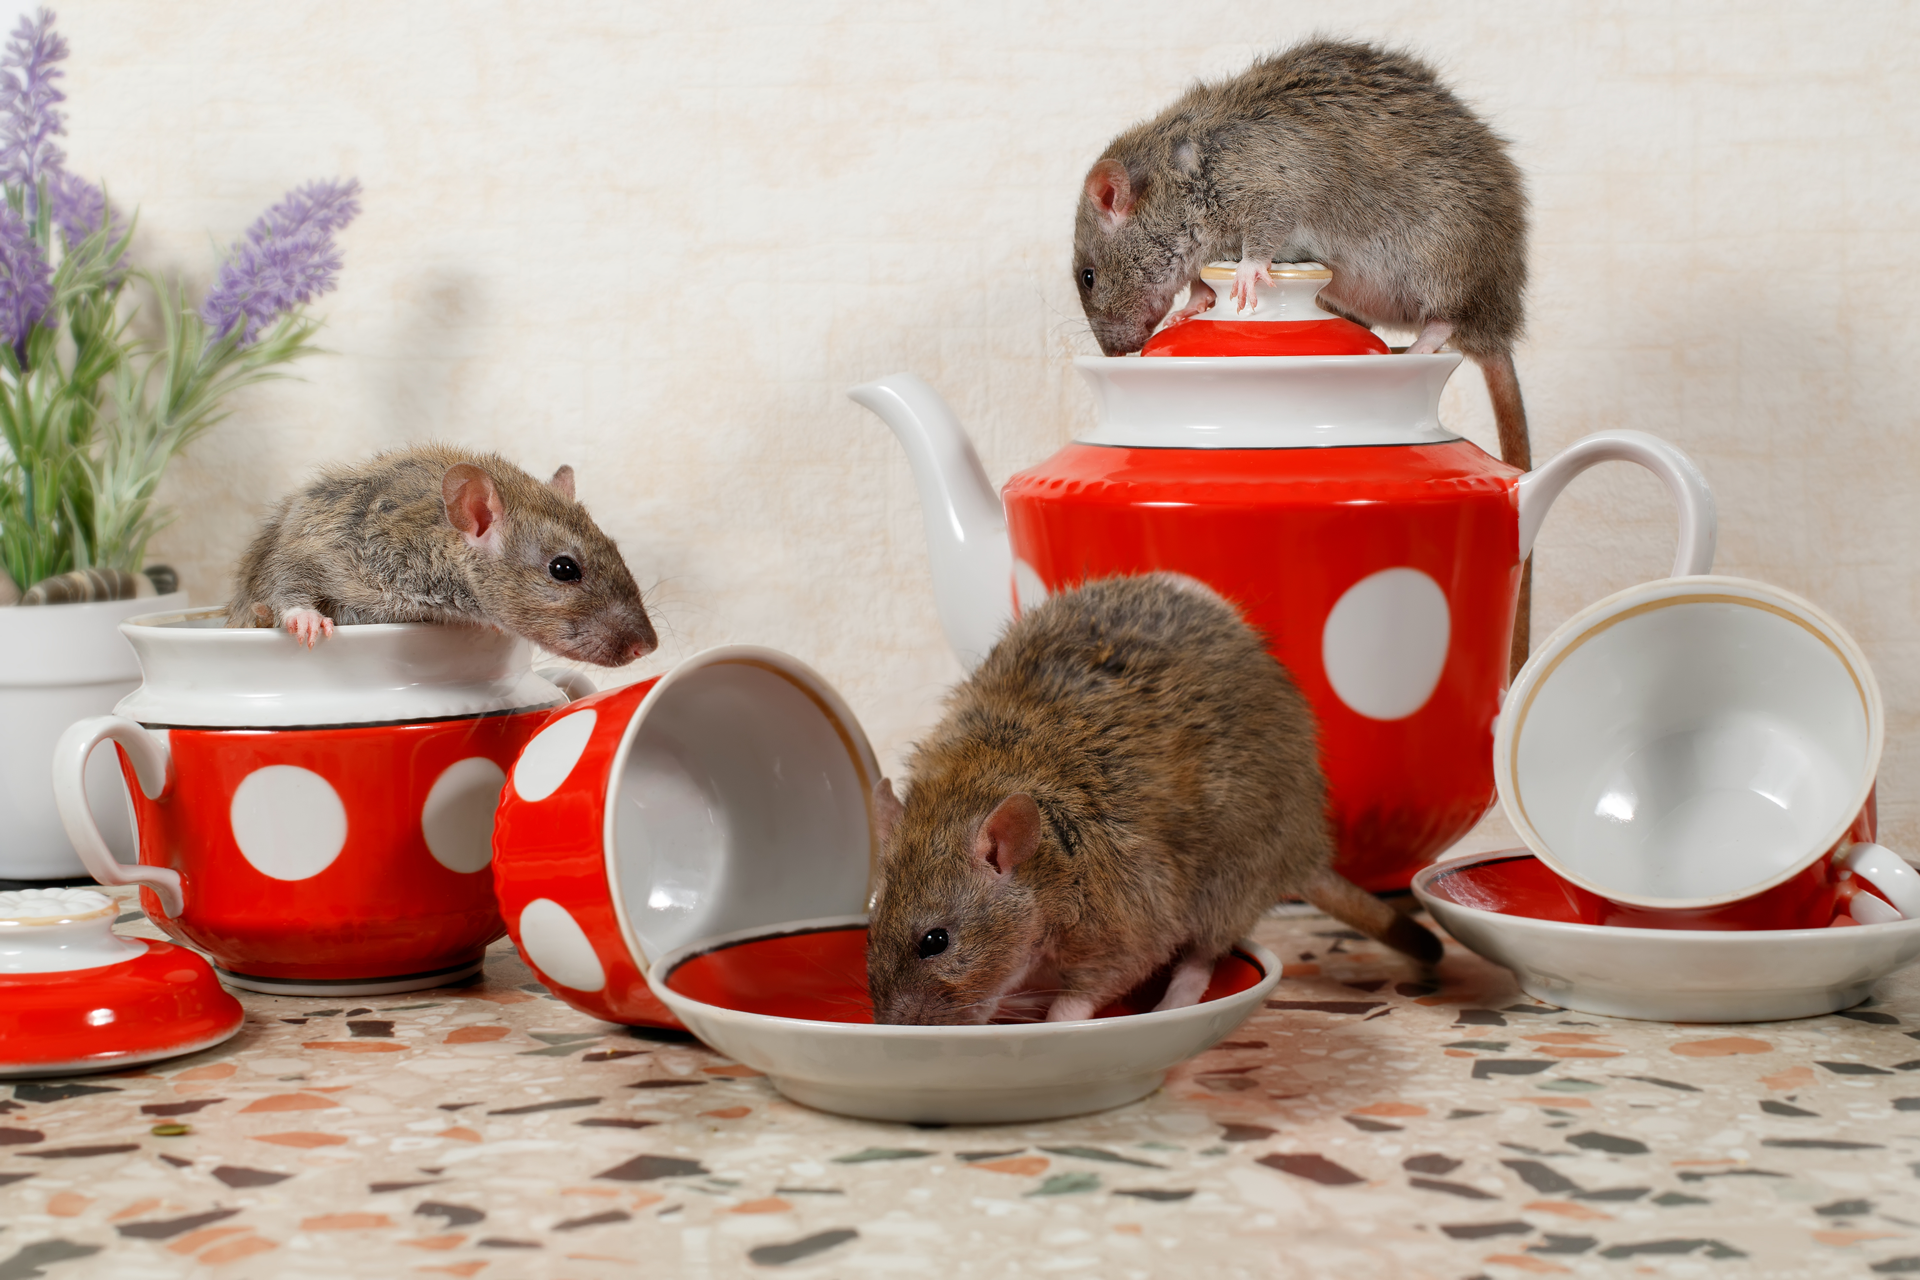 rats-in-dishes